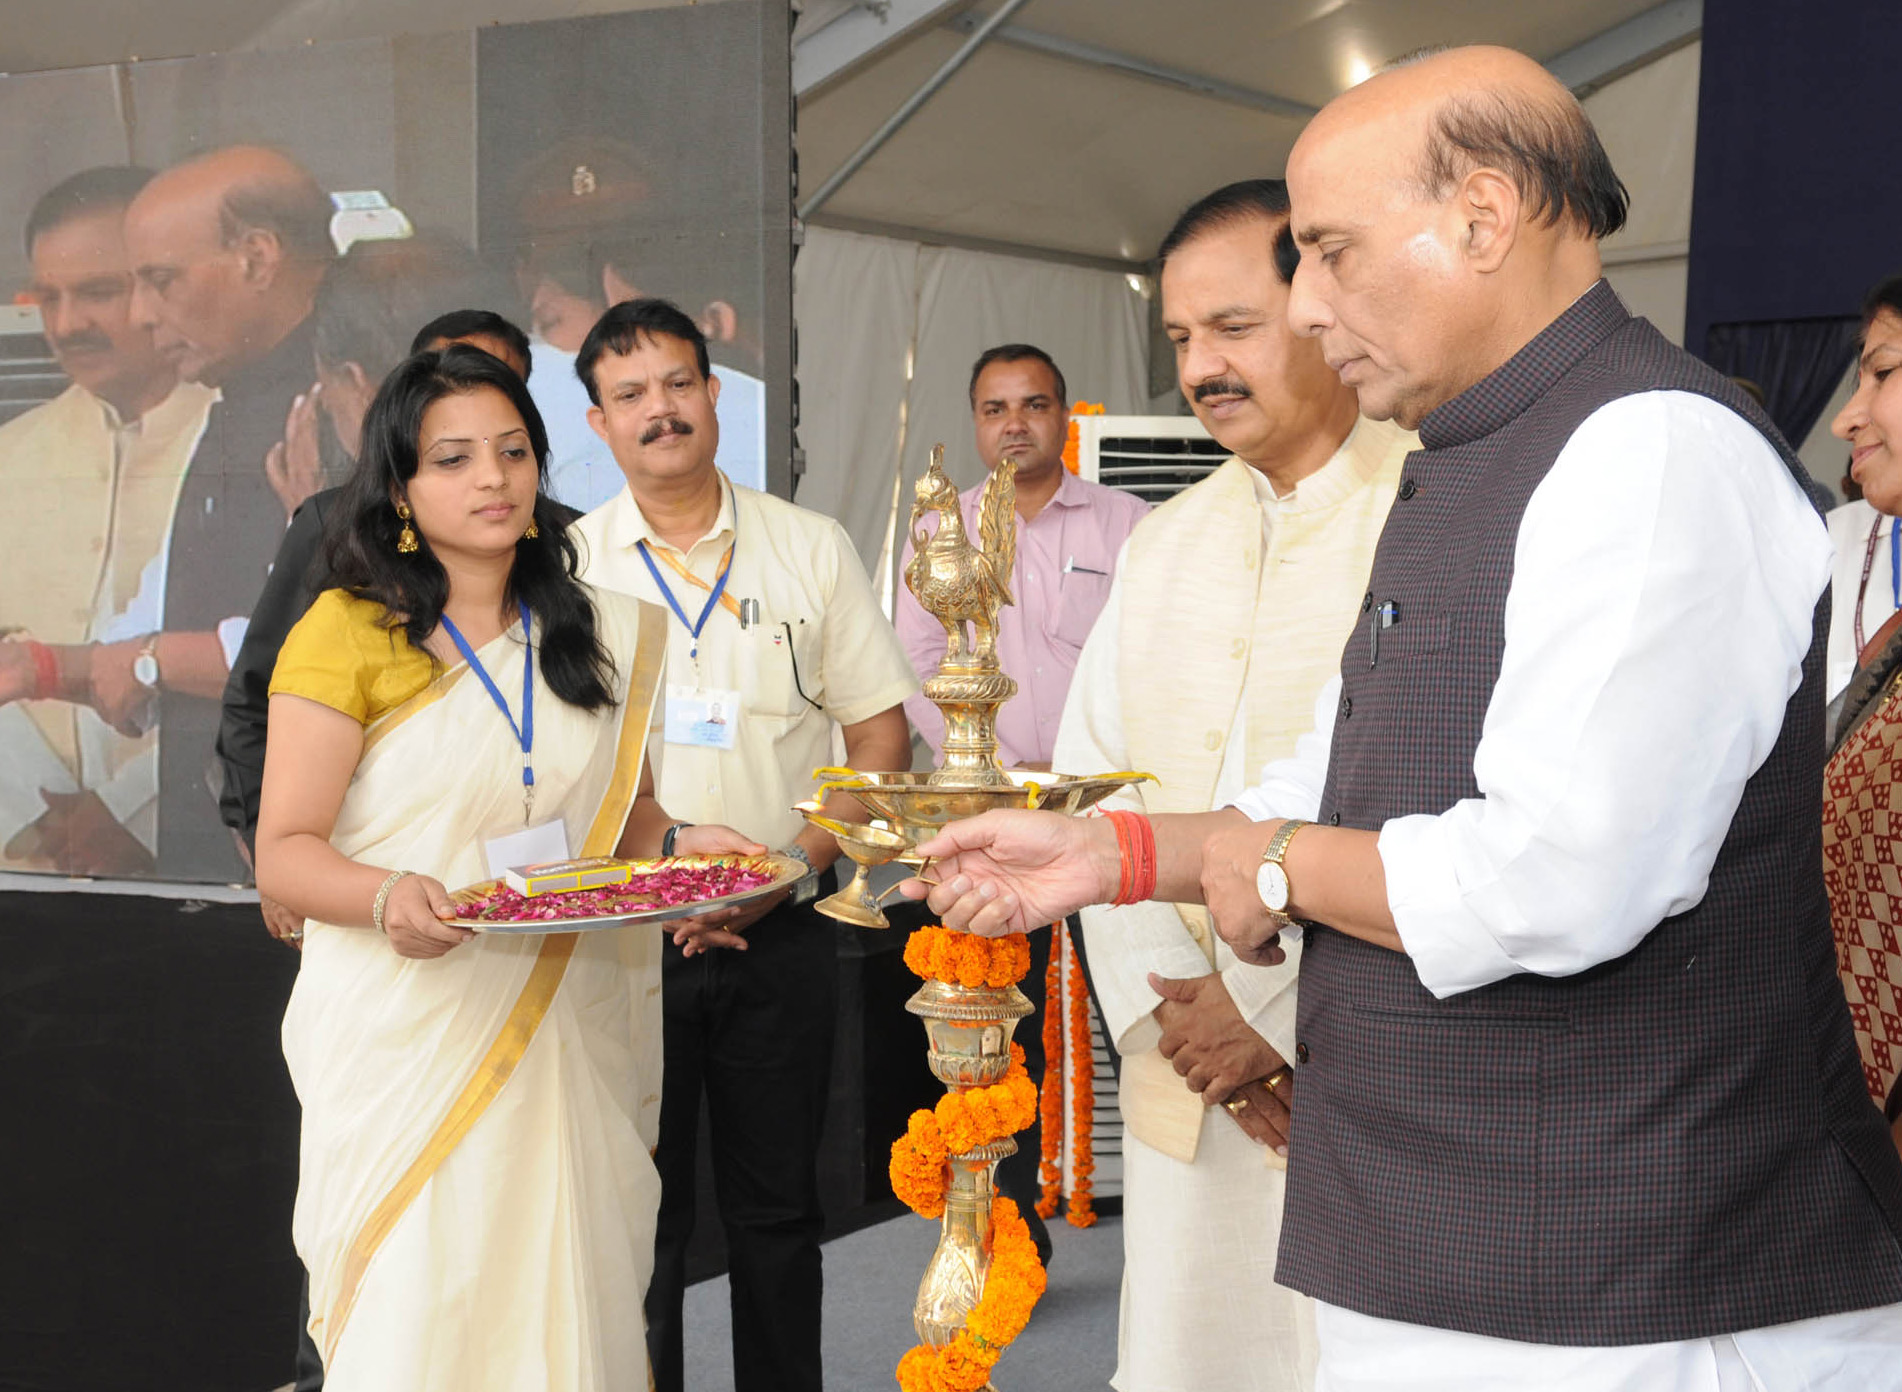 The Union Home Minister, Shri Rajnath Singh lighting the lamp at the foundation stone laying ceremony of Pt. Deen Dayal Upadhyay Institute of Archaeology, Archaeology Survey of India, in Greater Noida, Uttar Pradesh on October 28, 2016. The Minister of State for Culture and Tourism (Independent Charge), Dr. Mahesh Sharma is also seen.